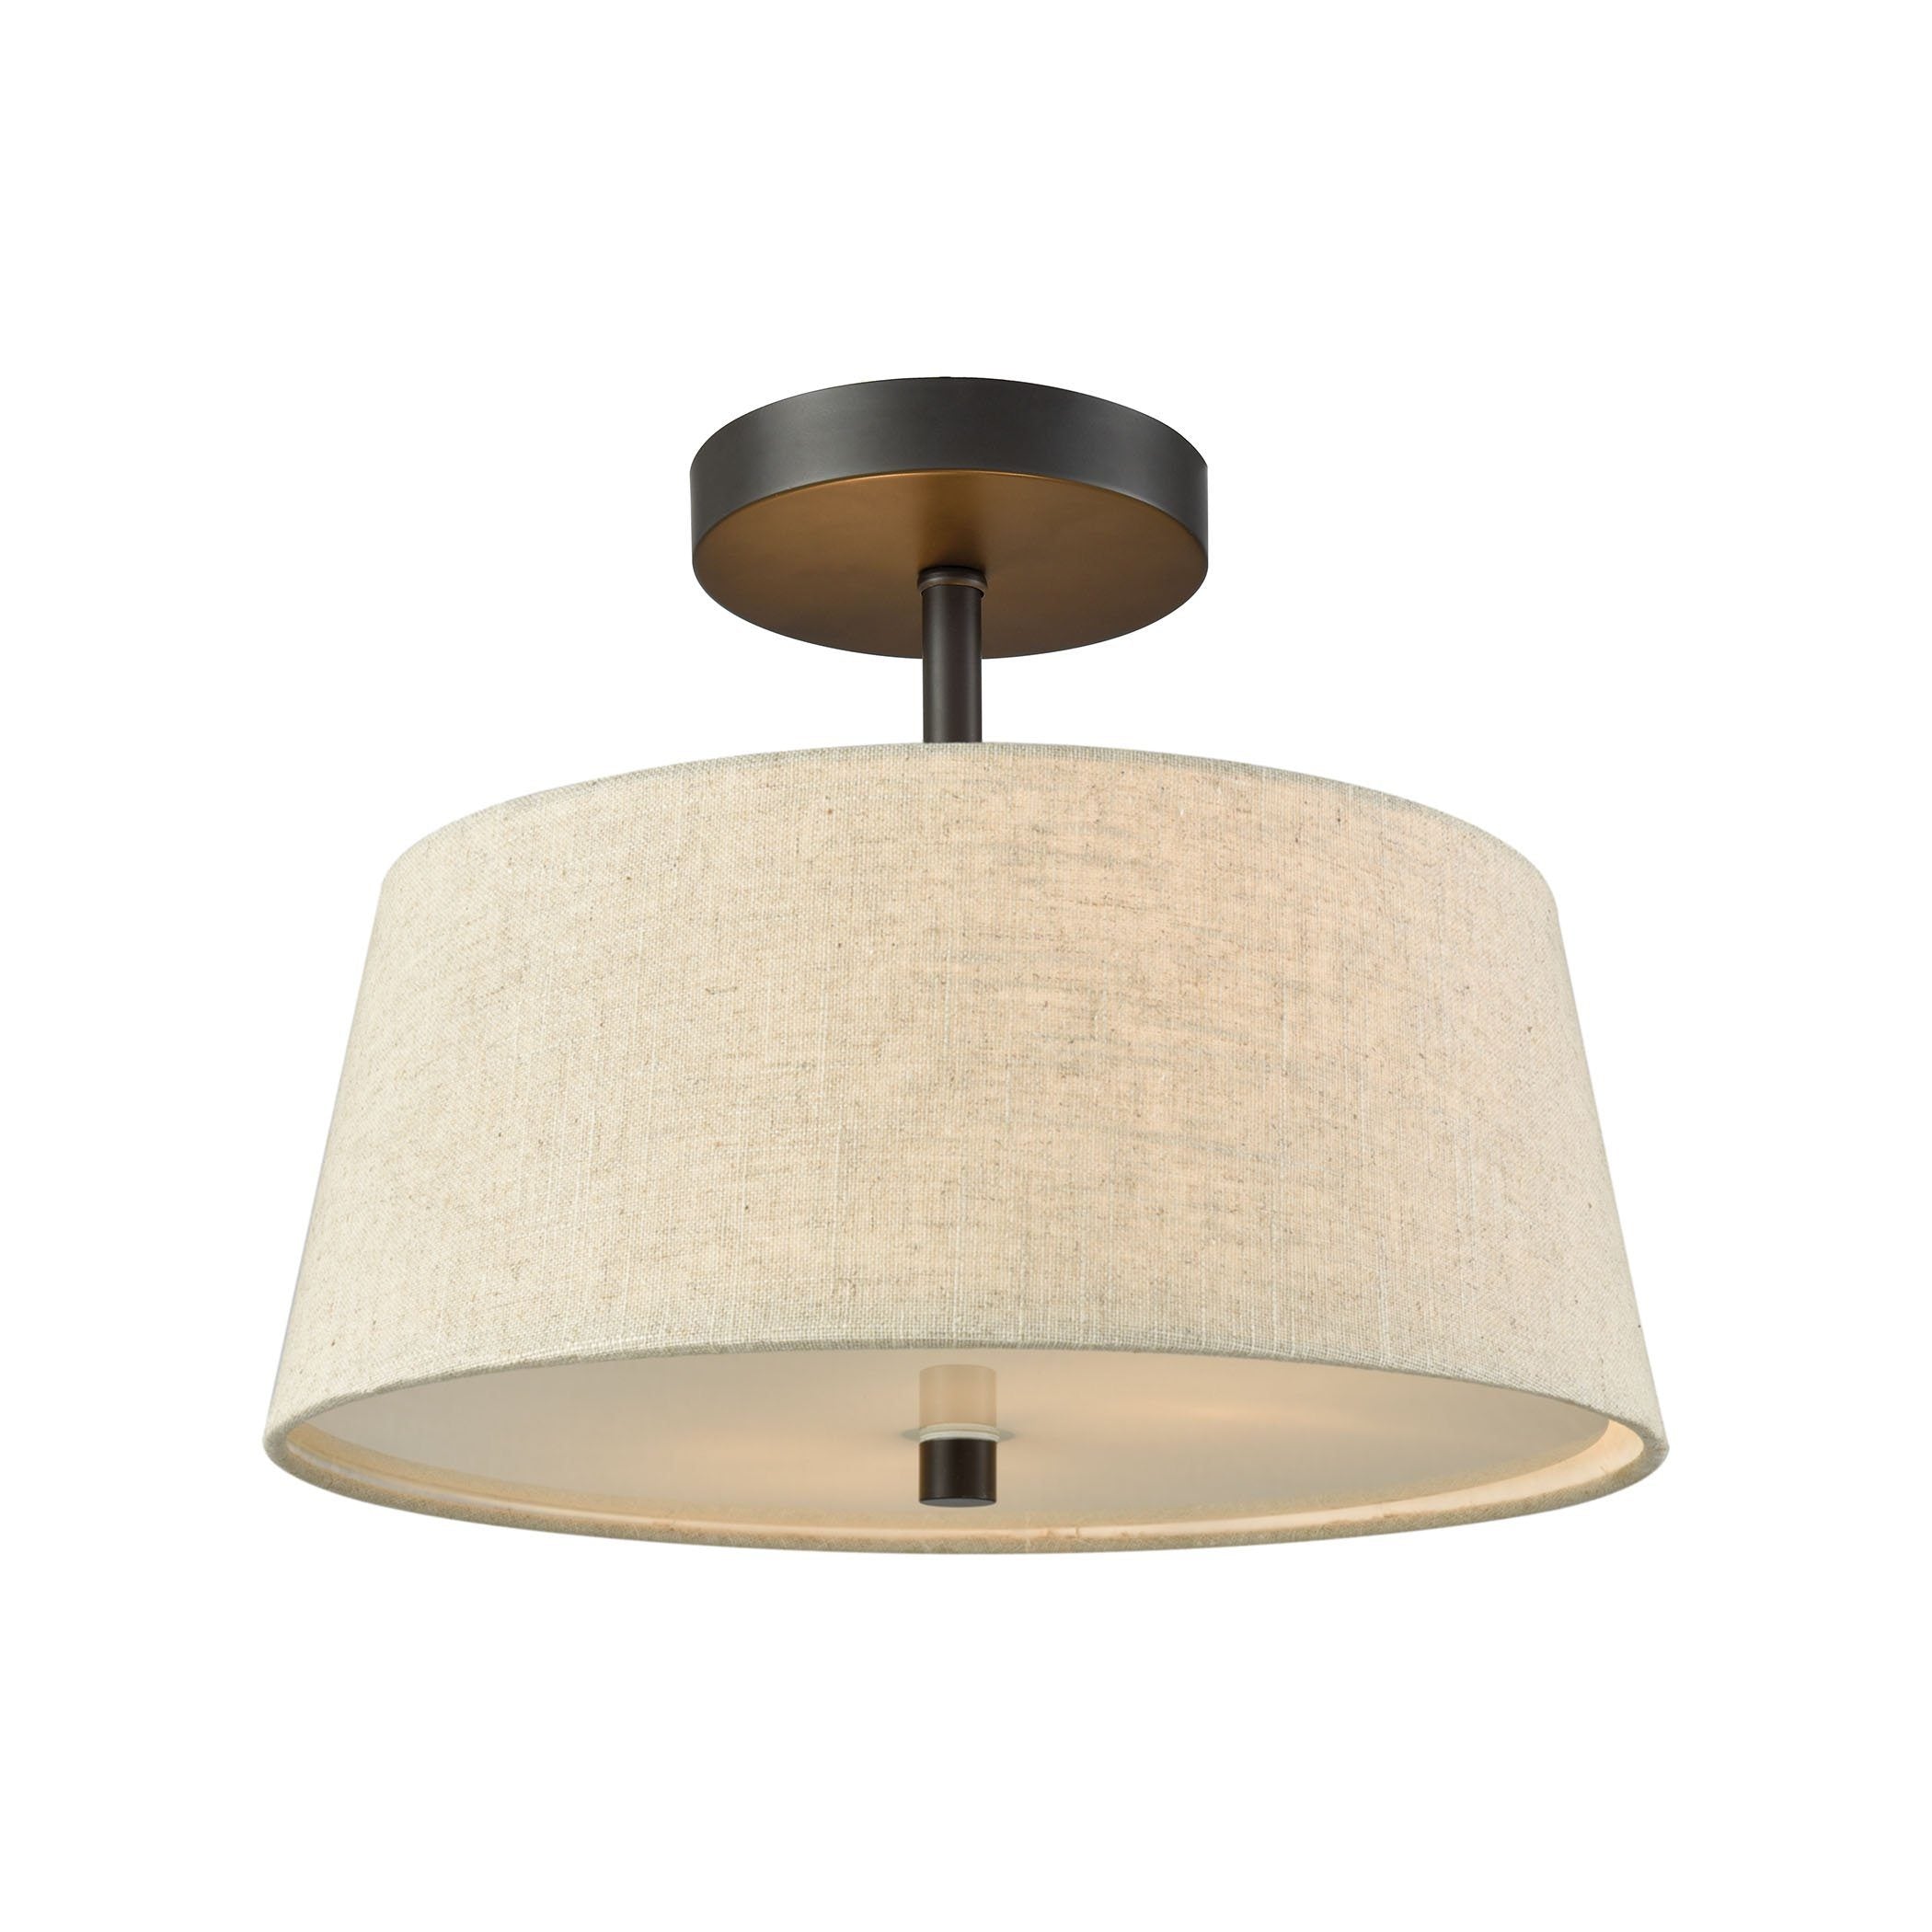 Morgan 2-Light Semi Flush Mount in Oil Rubbed Bronze with Beige Fabric Shade and White Glass Diffuse Ceiling Thomas Lighting 